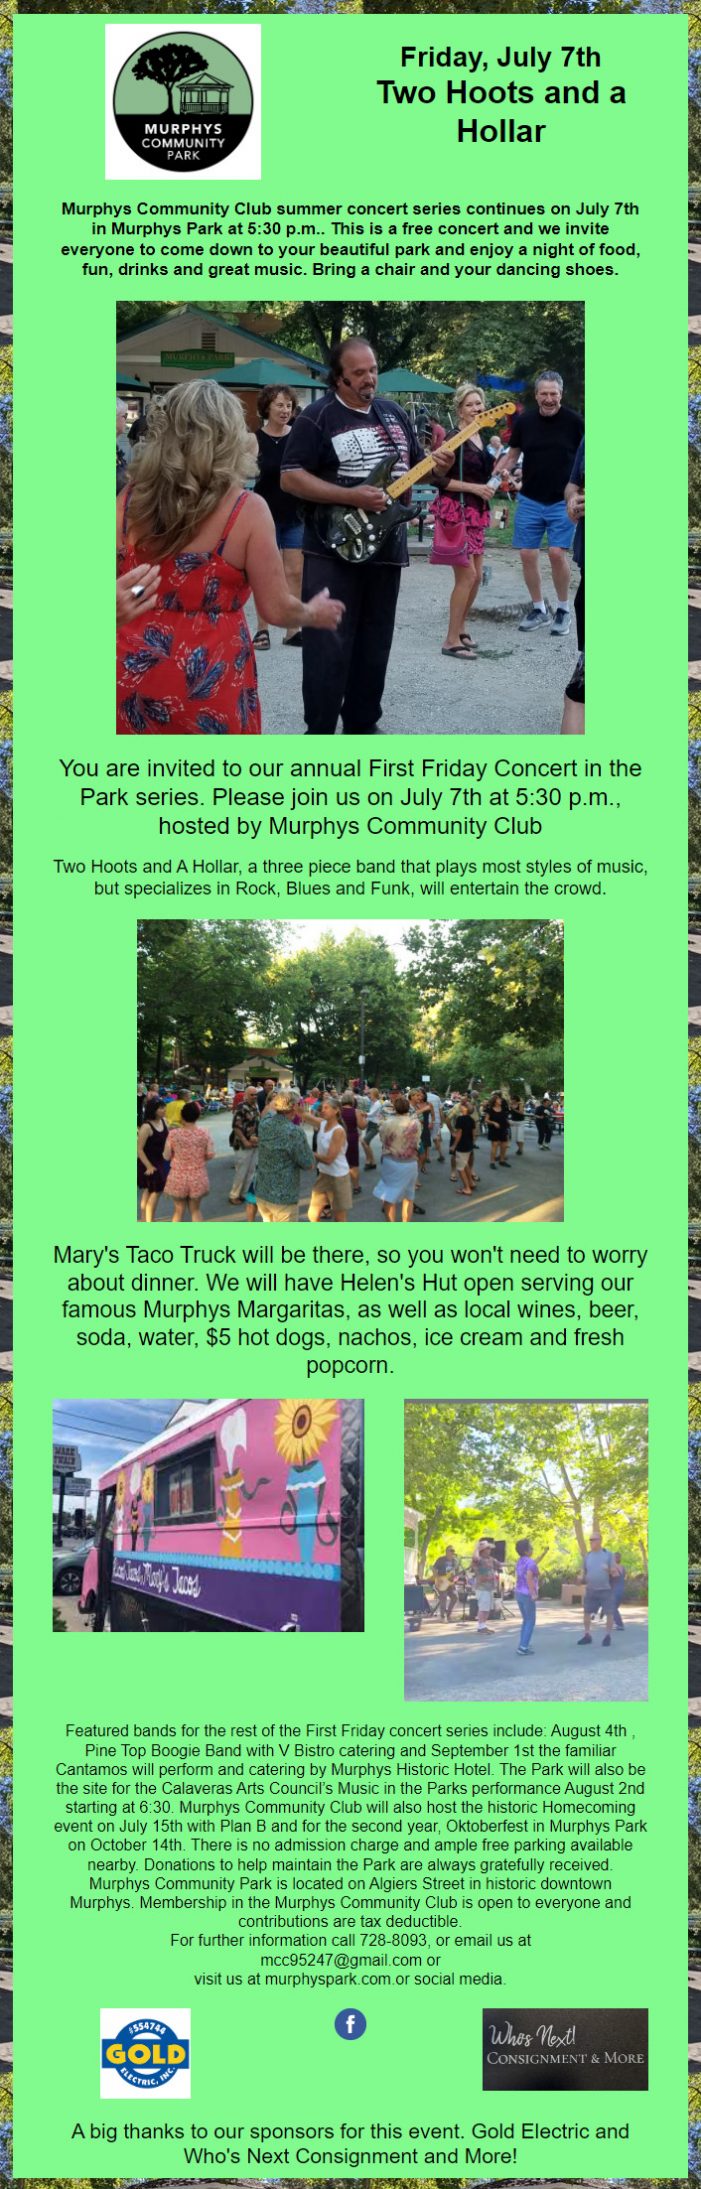 First Friday Concert in the Park with Two Hoots and a Hollar!